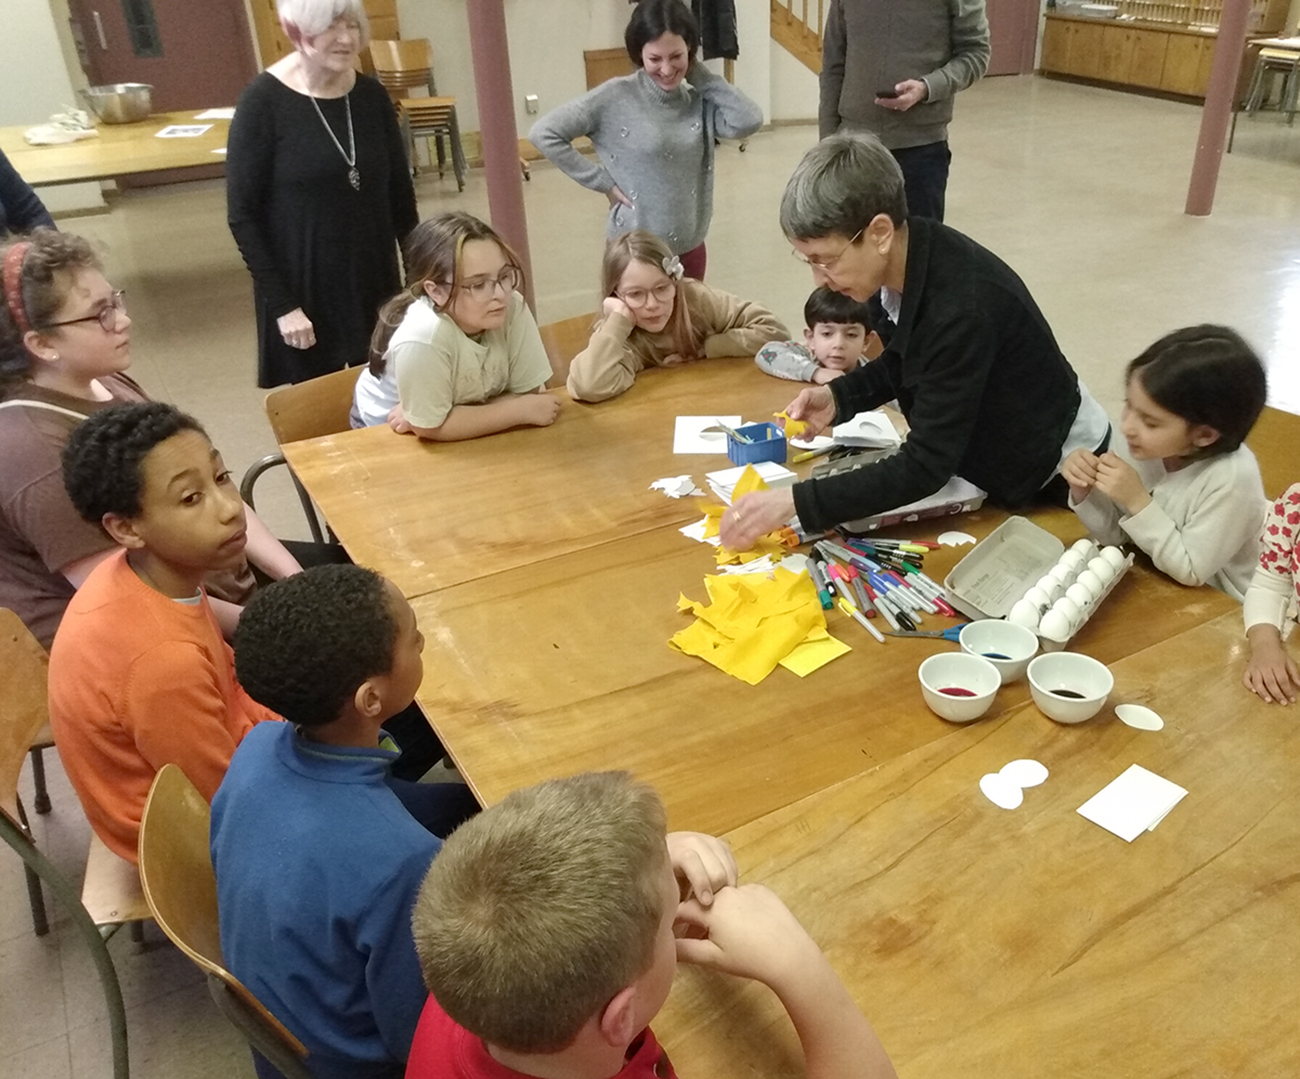 Pastor Dani is with a group of children that are sitting around a wooden table. There are eggs and dye and markers in the middle of the table for Easter egg decorating.